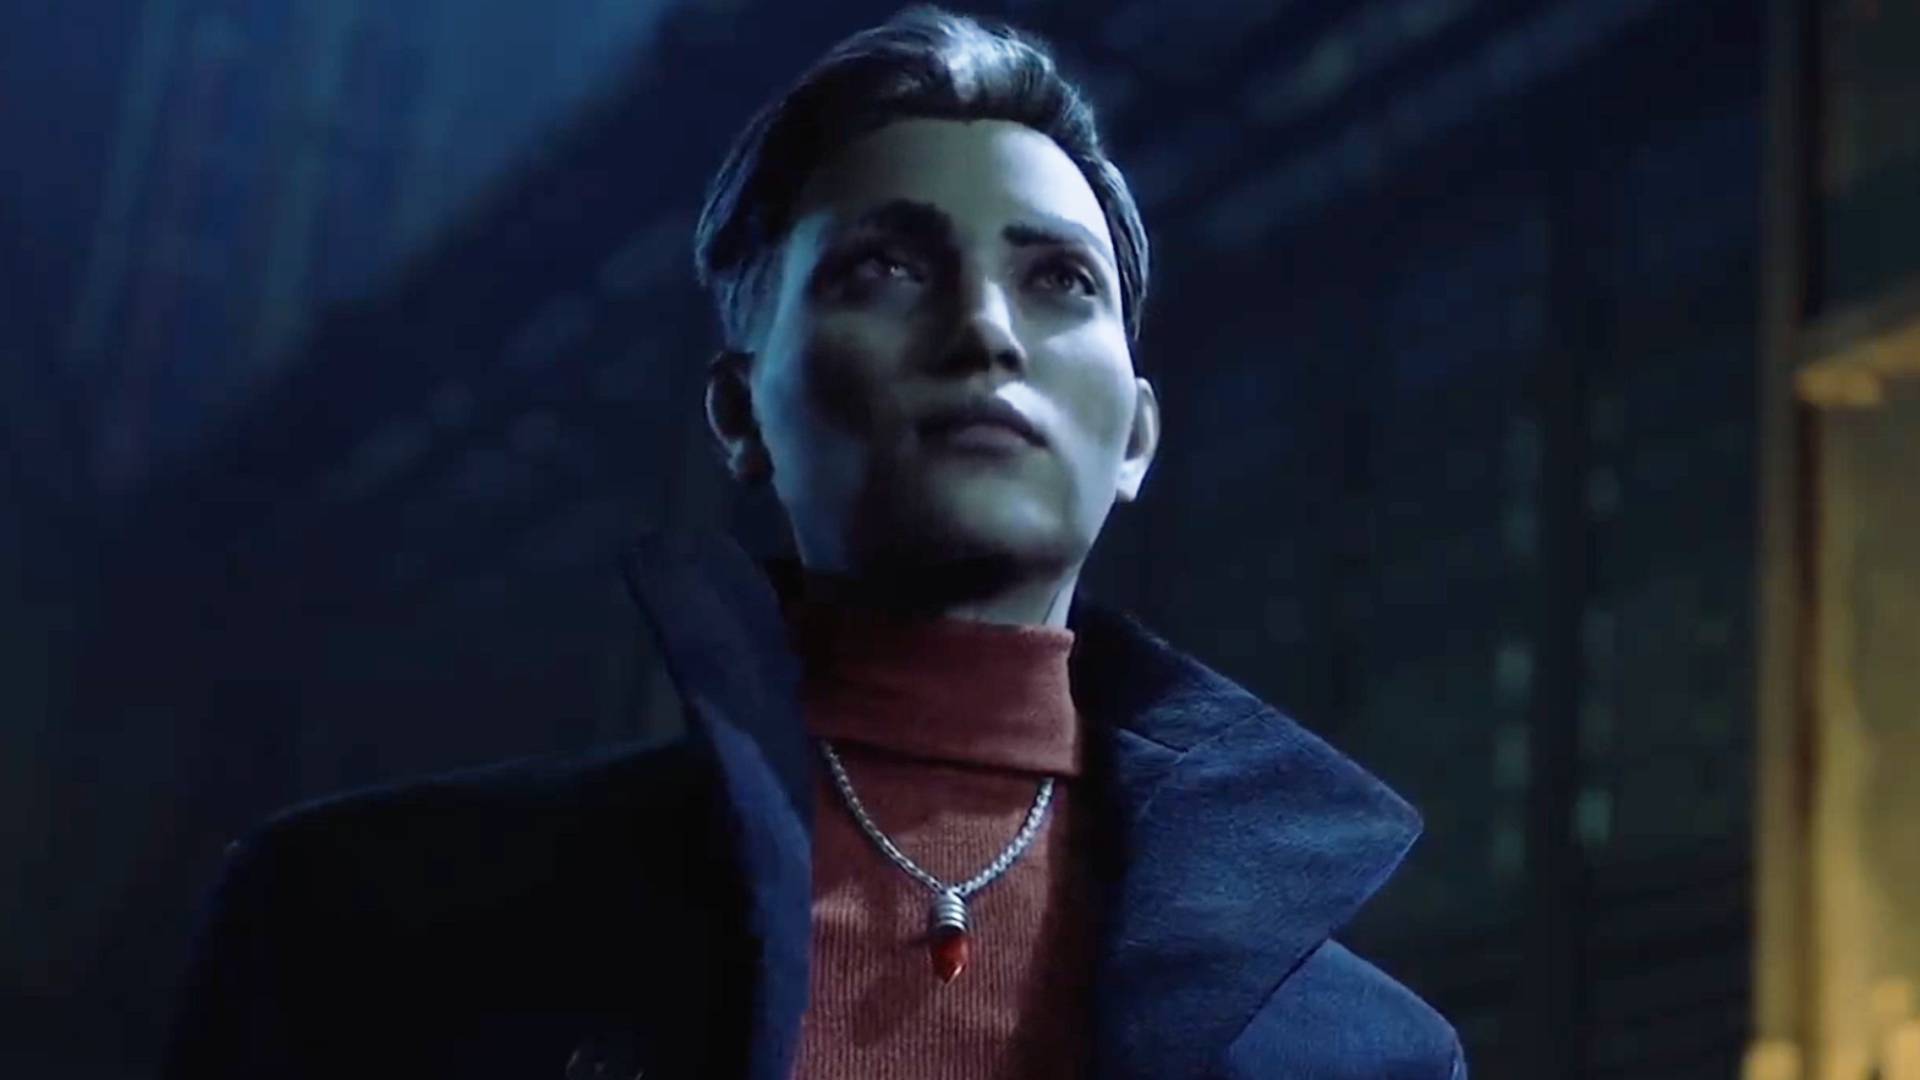 Vampire The Masquerade Bloodlines 2 finally shows off gameplay